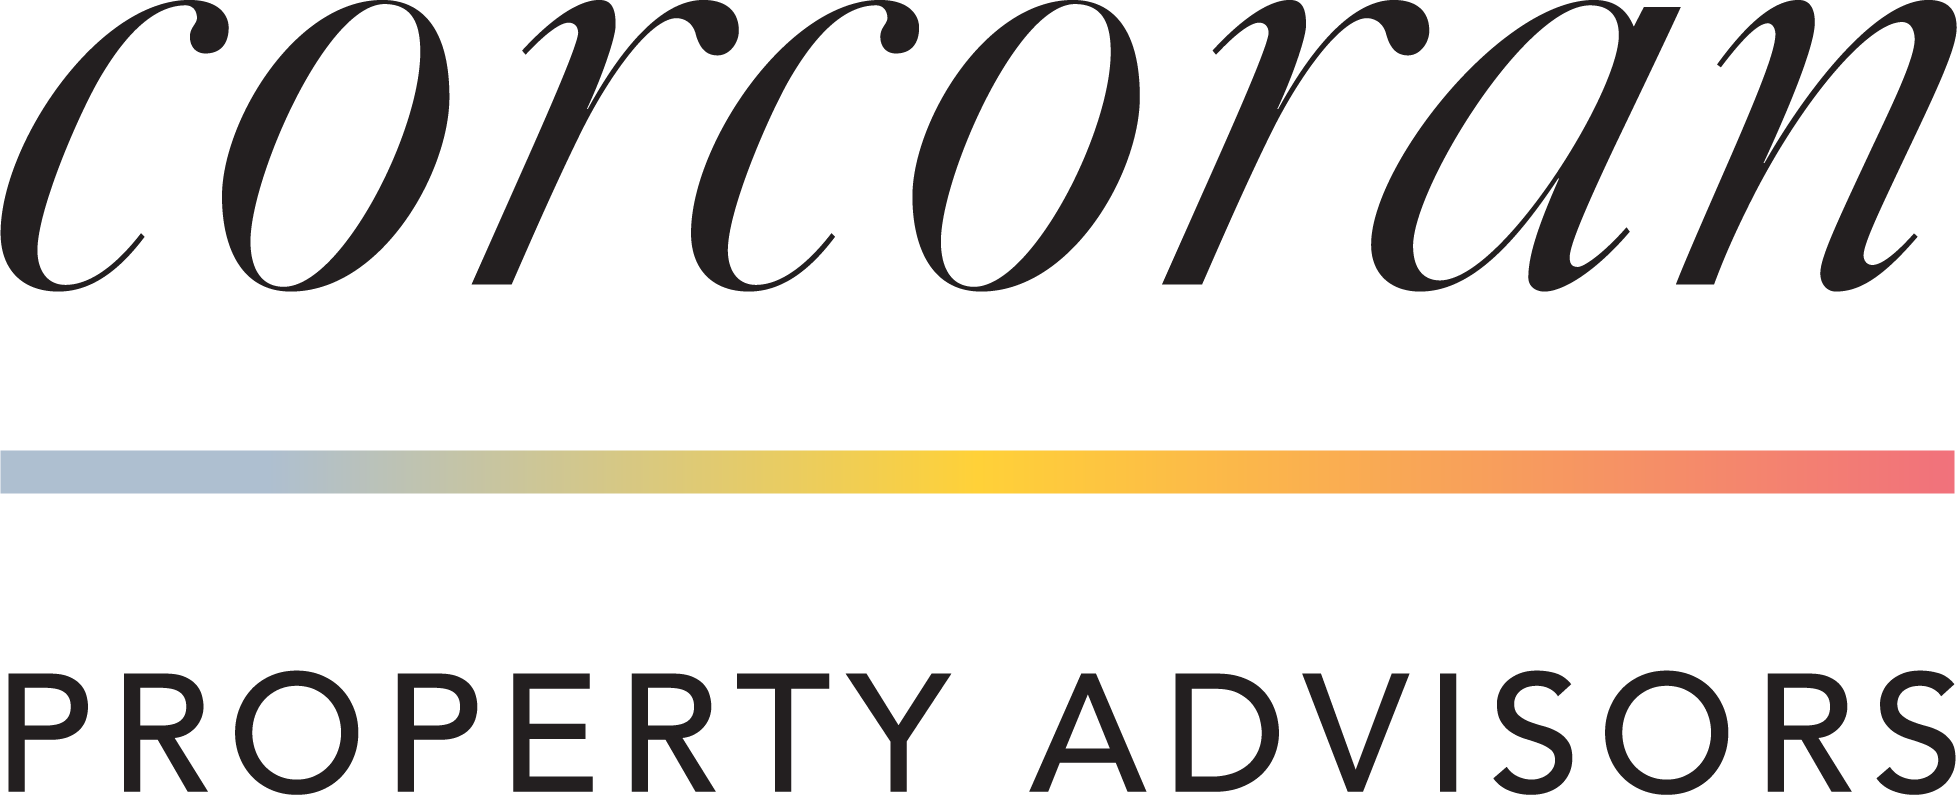 Building presented by Corcoran Property Advisors